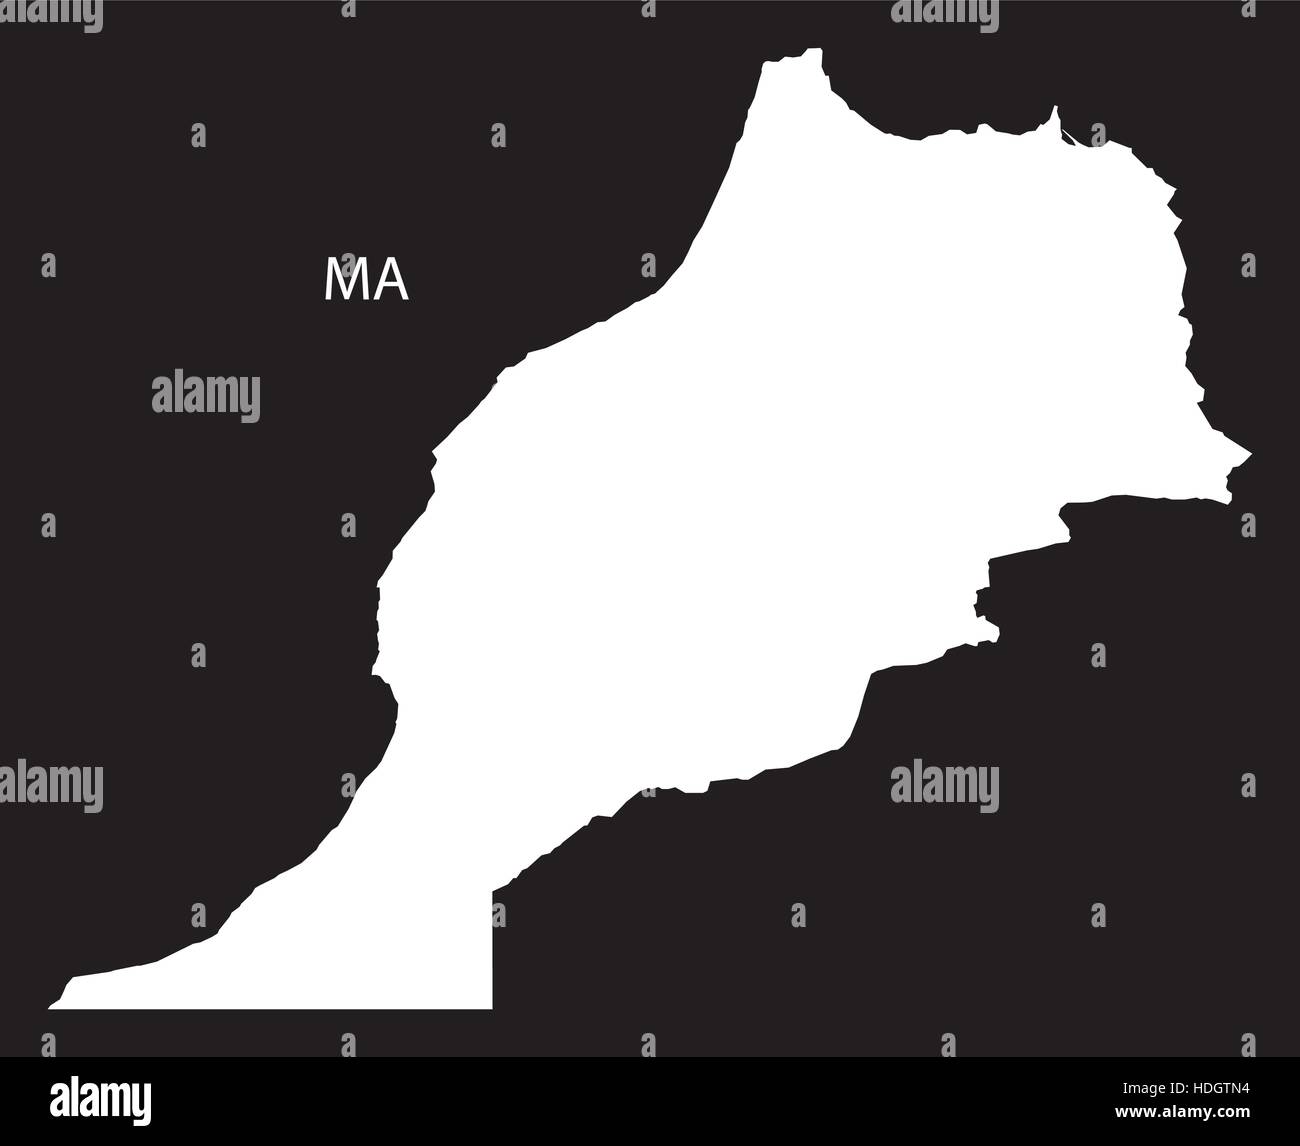 Morocco Map black and white illustration Stock Vector